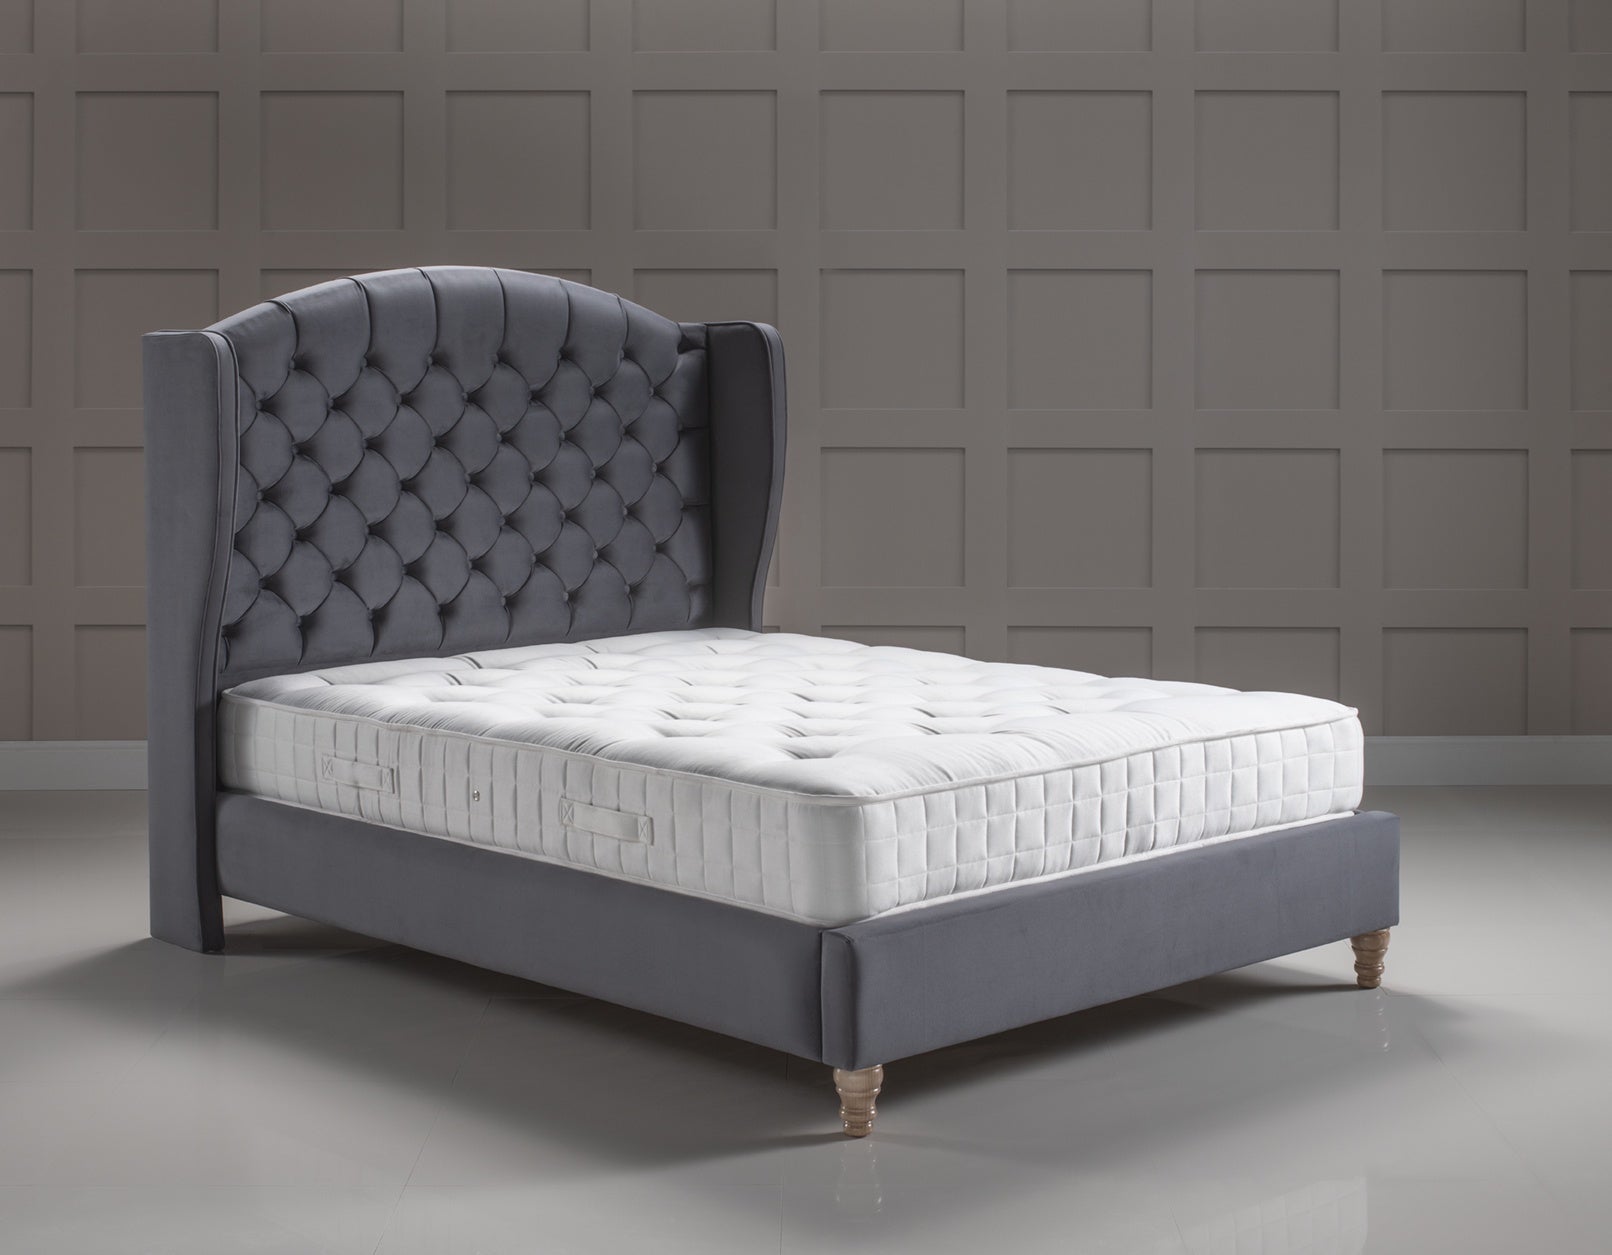 The Glenmore Upholstered Bed